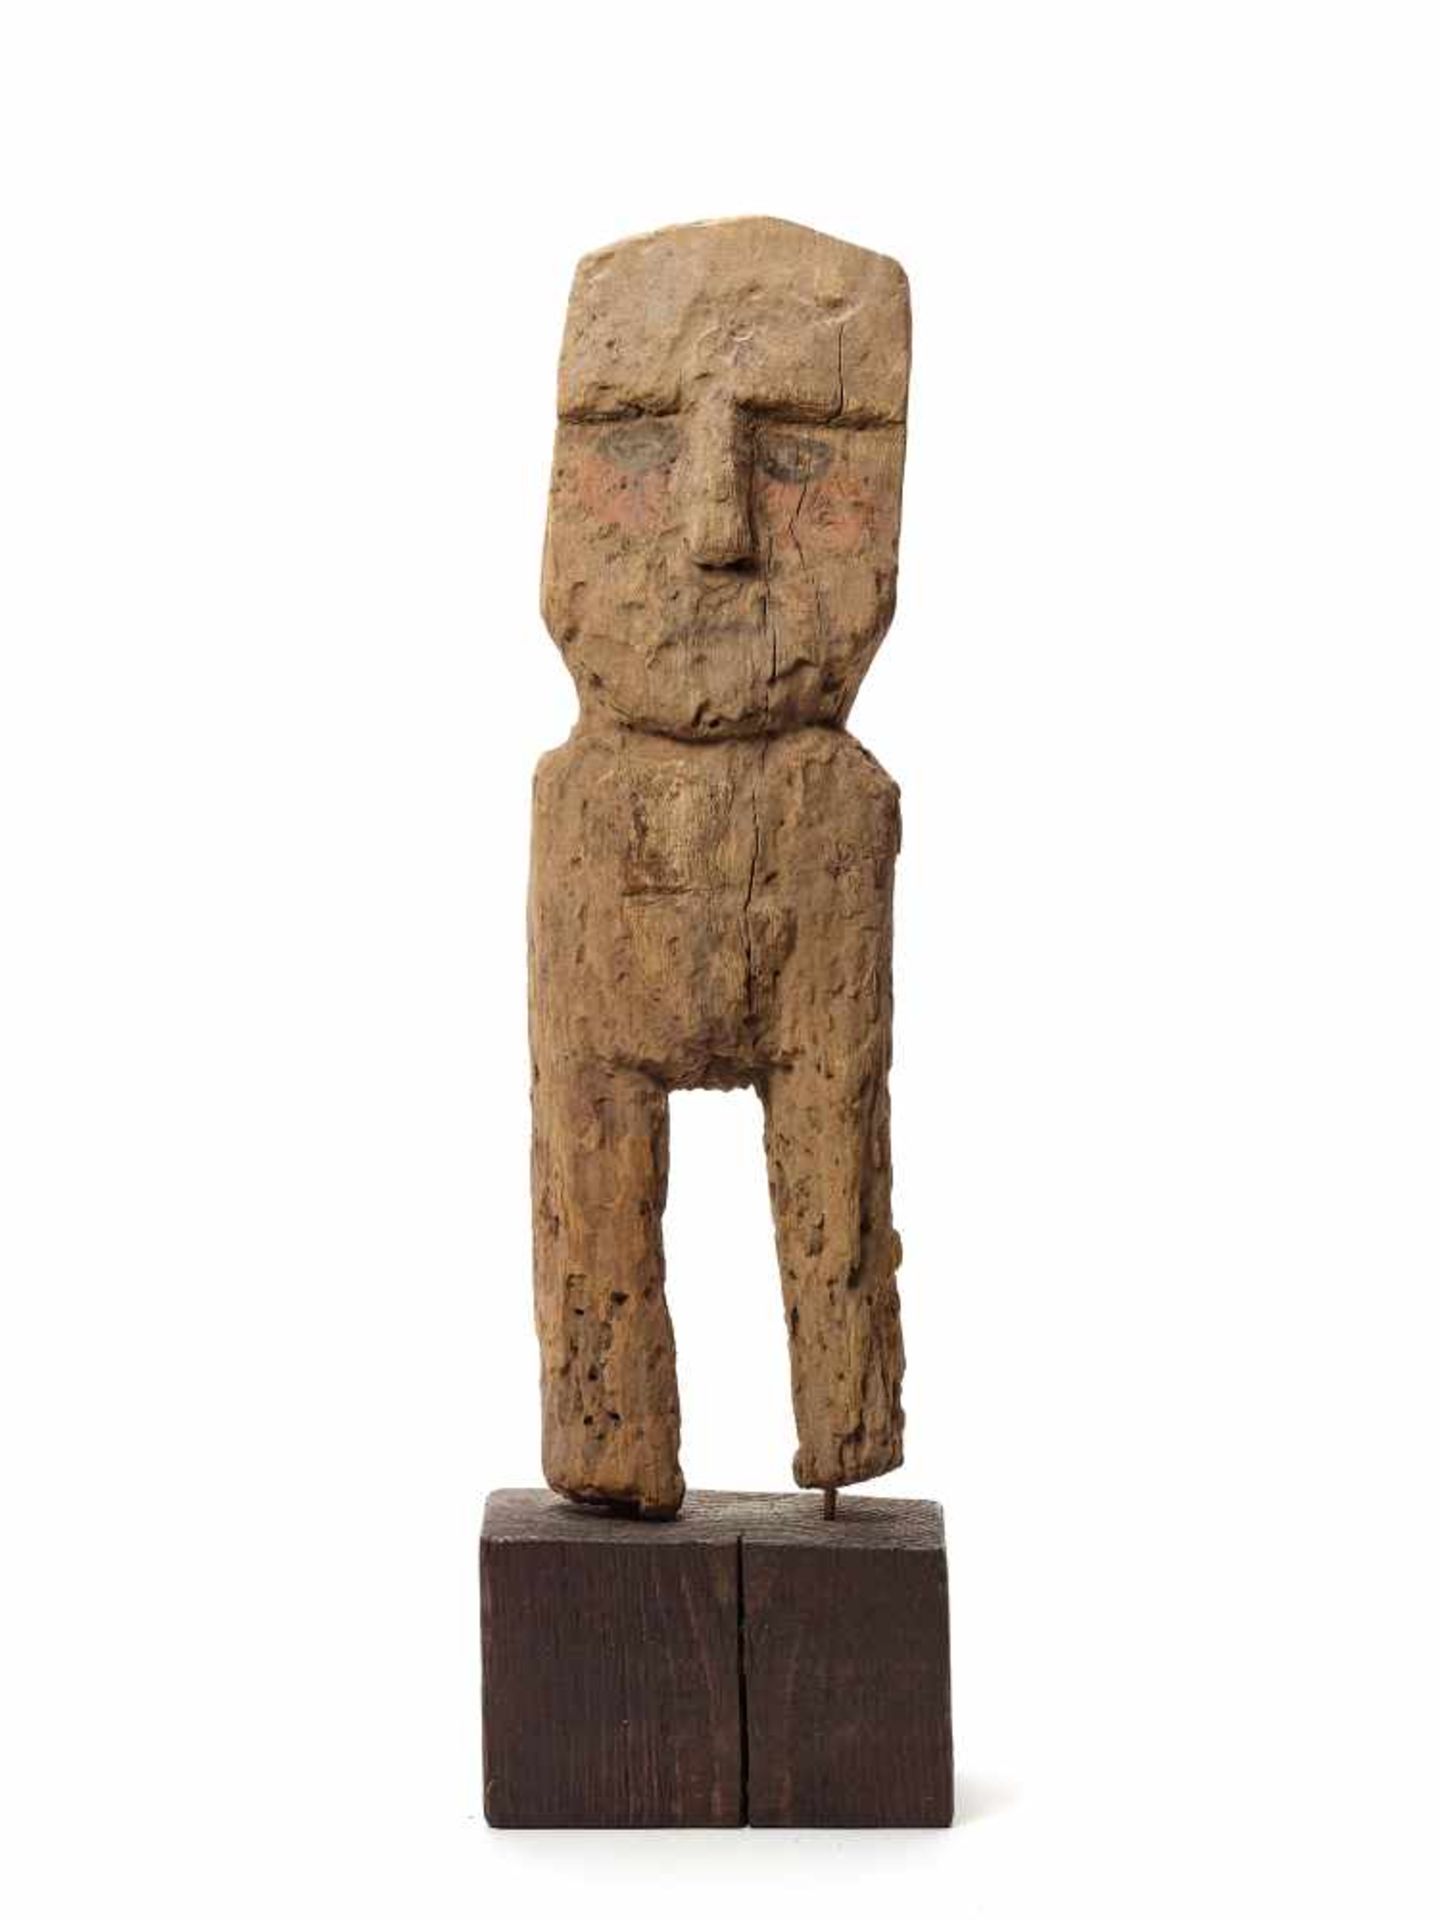 WOODEN FEMALE FIGURE - CHANCAY, PERU, C. 1000-1200 ADCarved and painted woodChancay, Peru, c. 1000-